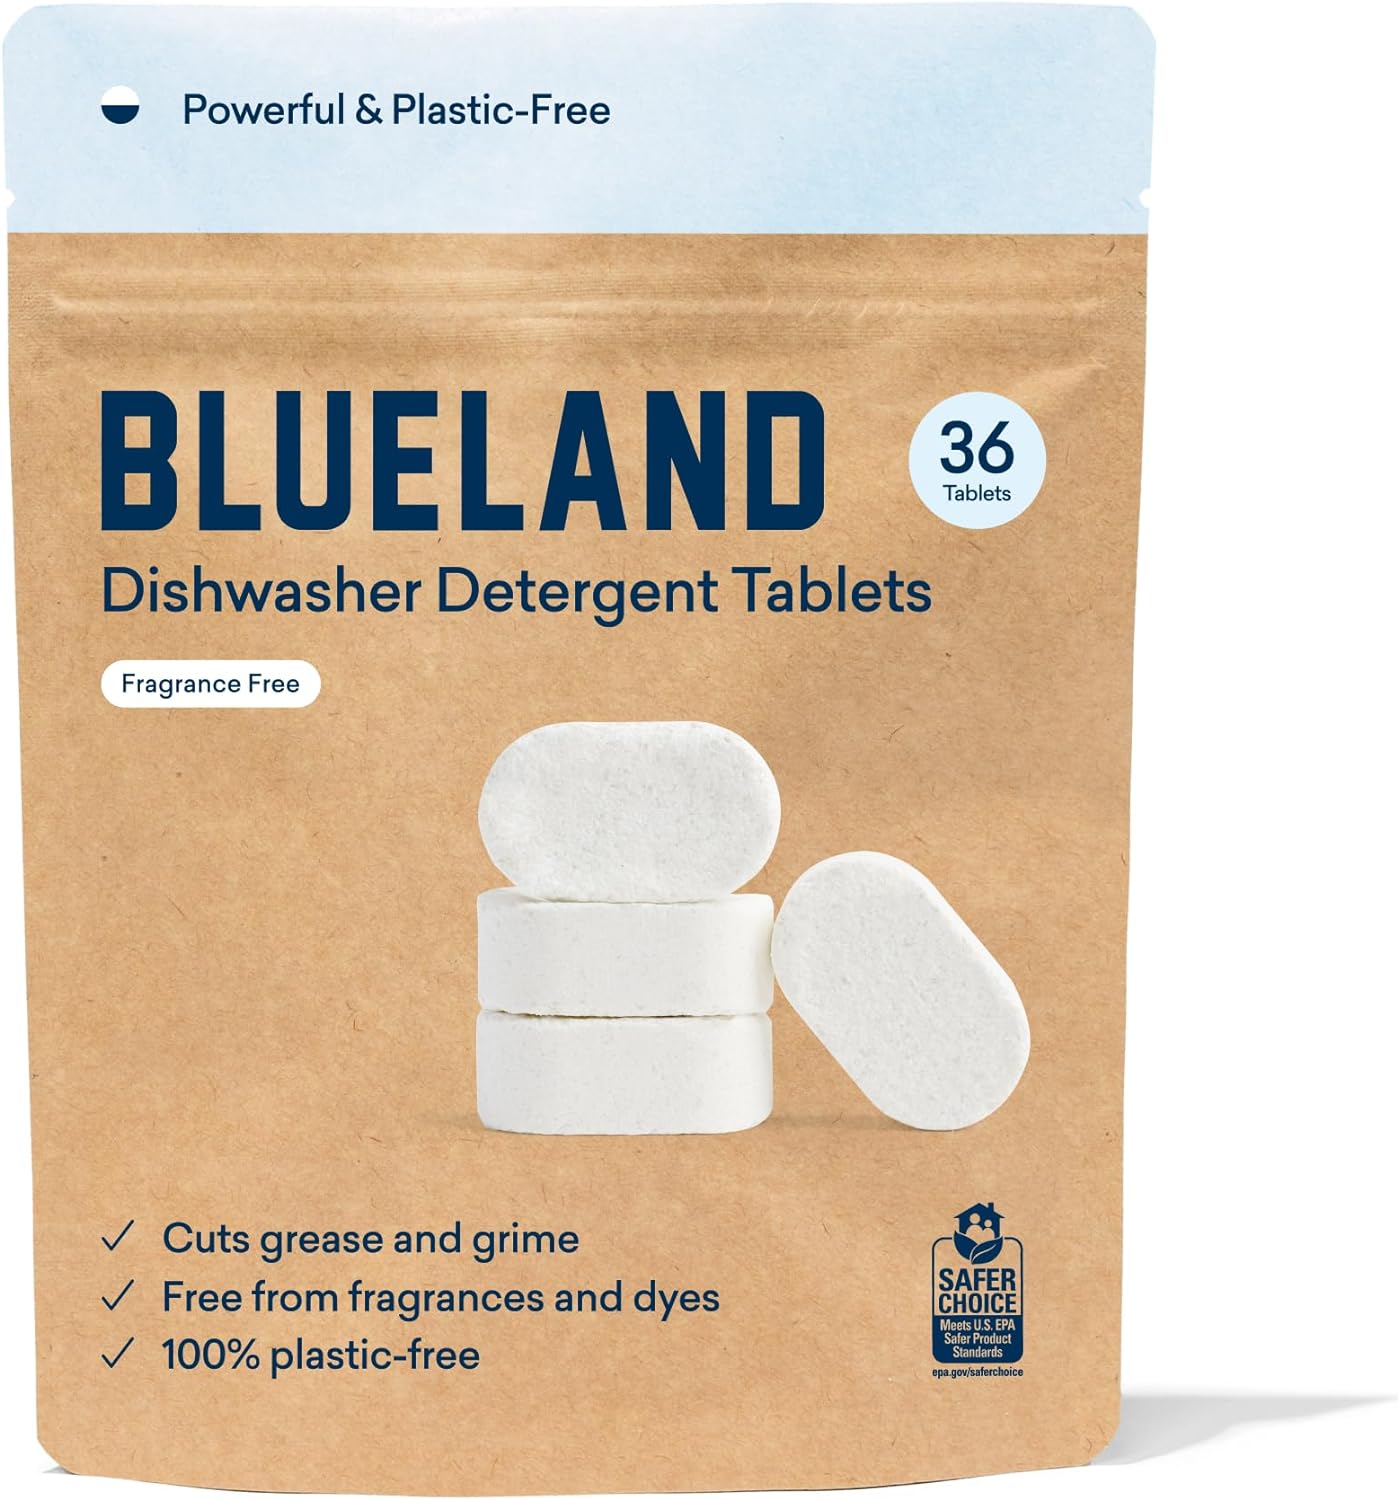 BLUELAND Dishwasher Detergent Tablet Refill 36 Count - Plastic-Free & Eco Friendly Alternative to Liquid Pods or Sheets - Natural, Sustainable - 36 Washes…